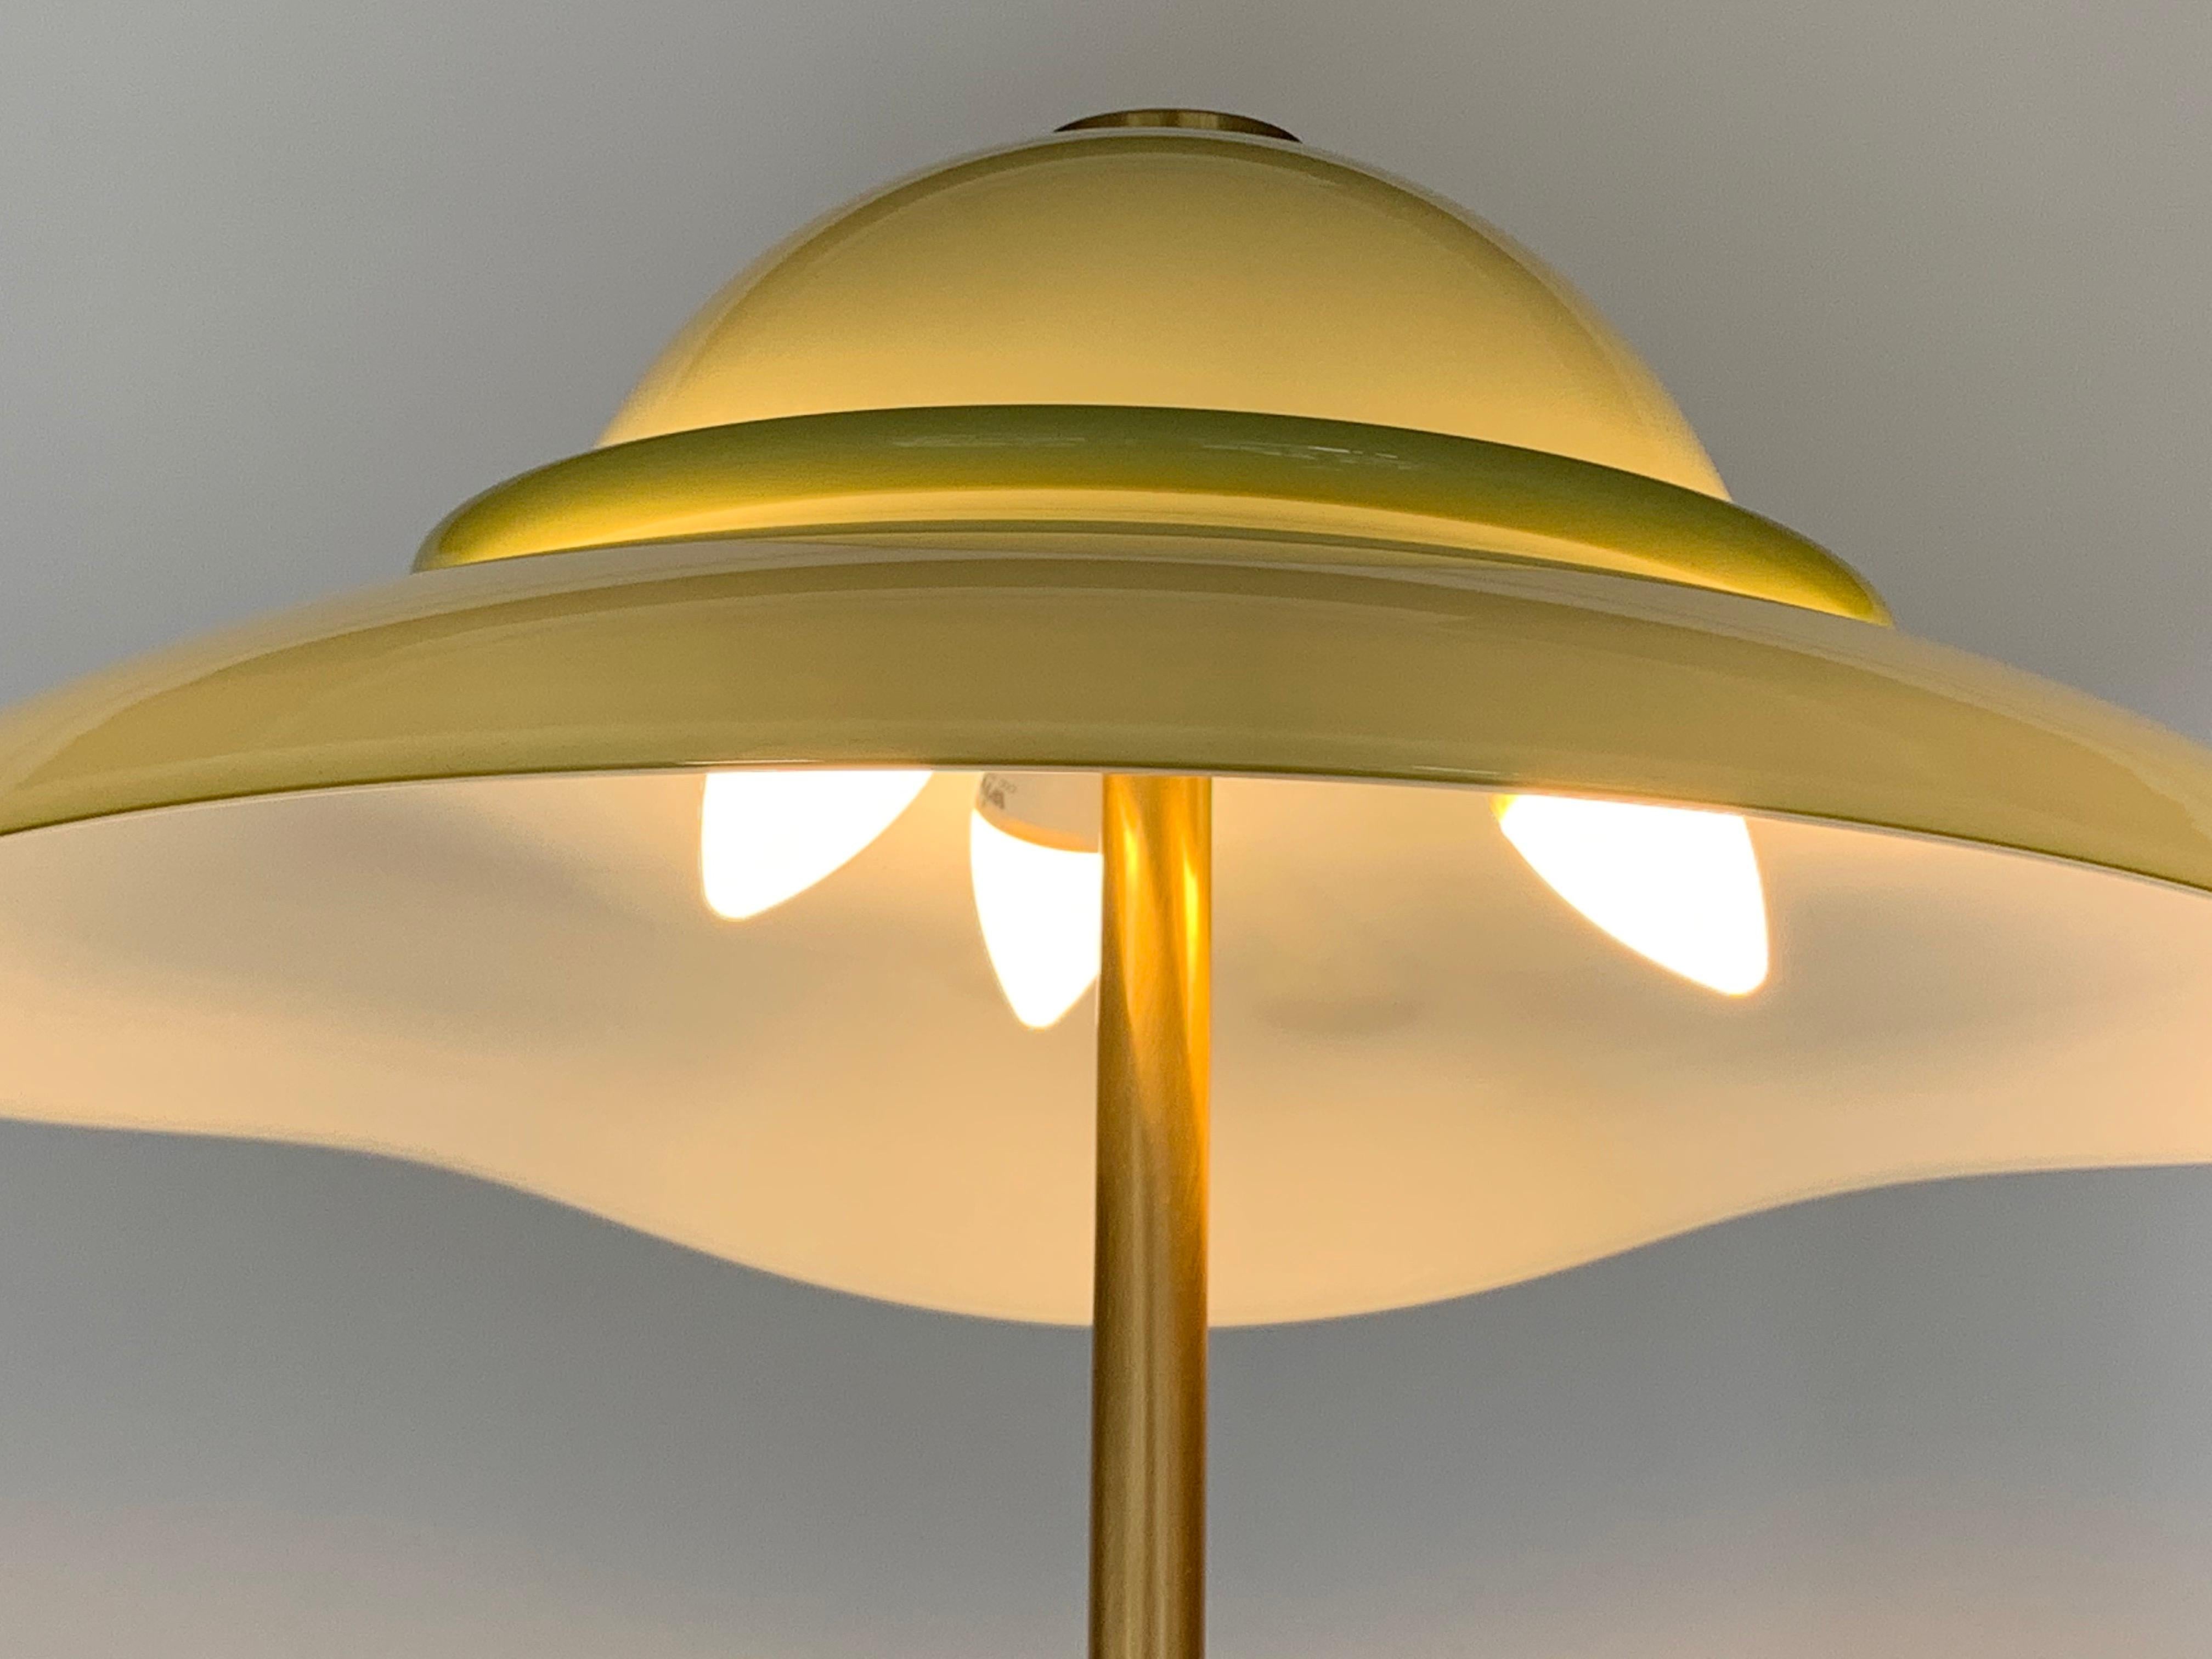 Italian Murano glass floor lamp designed and produced by La Murrina in 1980. 
The structure of the lamp is in brushed brass.
Perfect conditions. Signed.

Short story:
The story of the company dates back to the 1960s in Murano where there was a